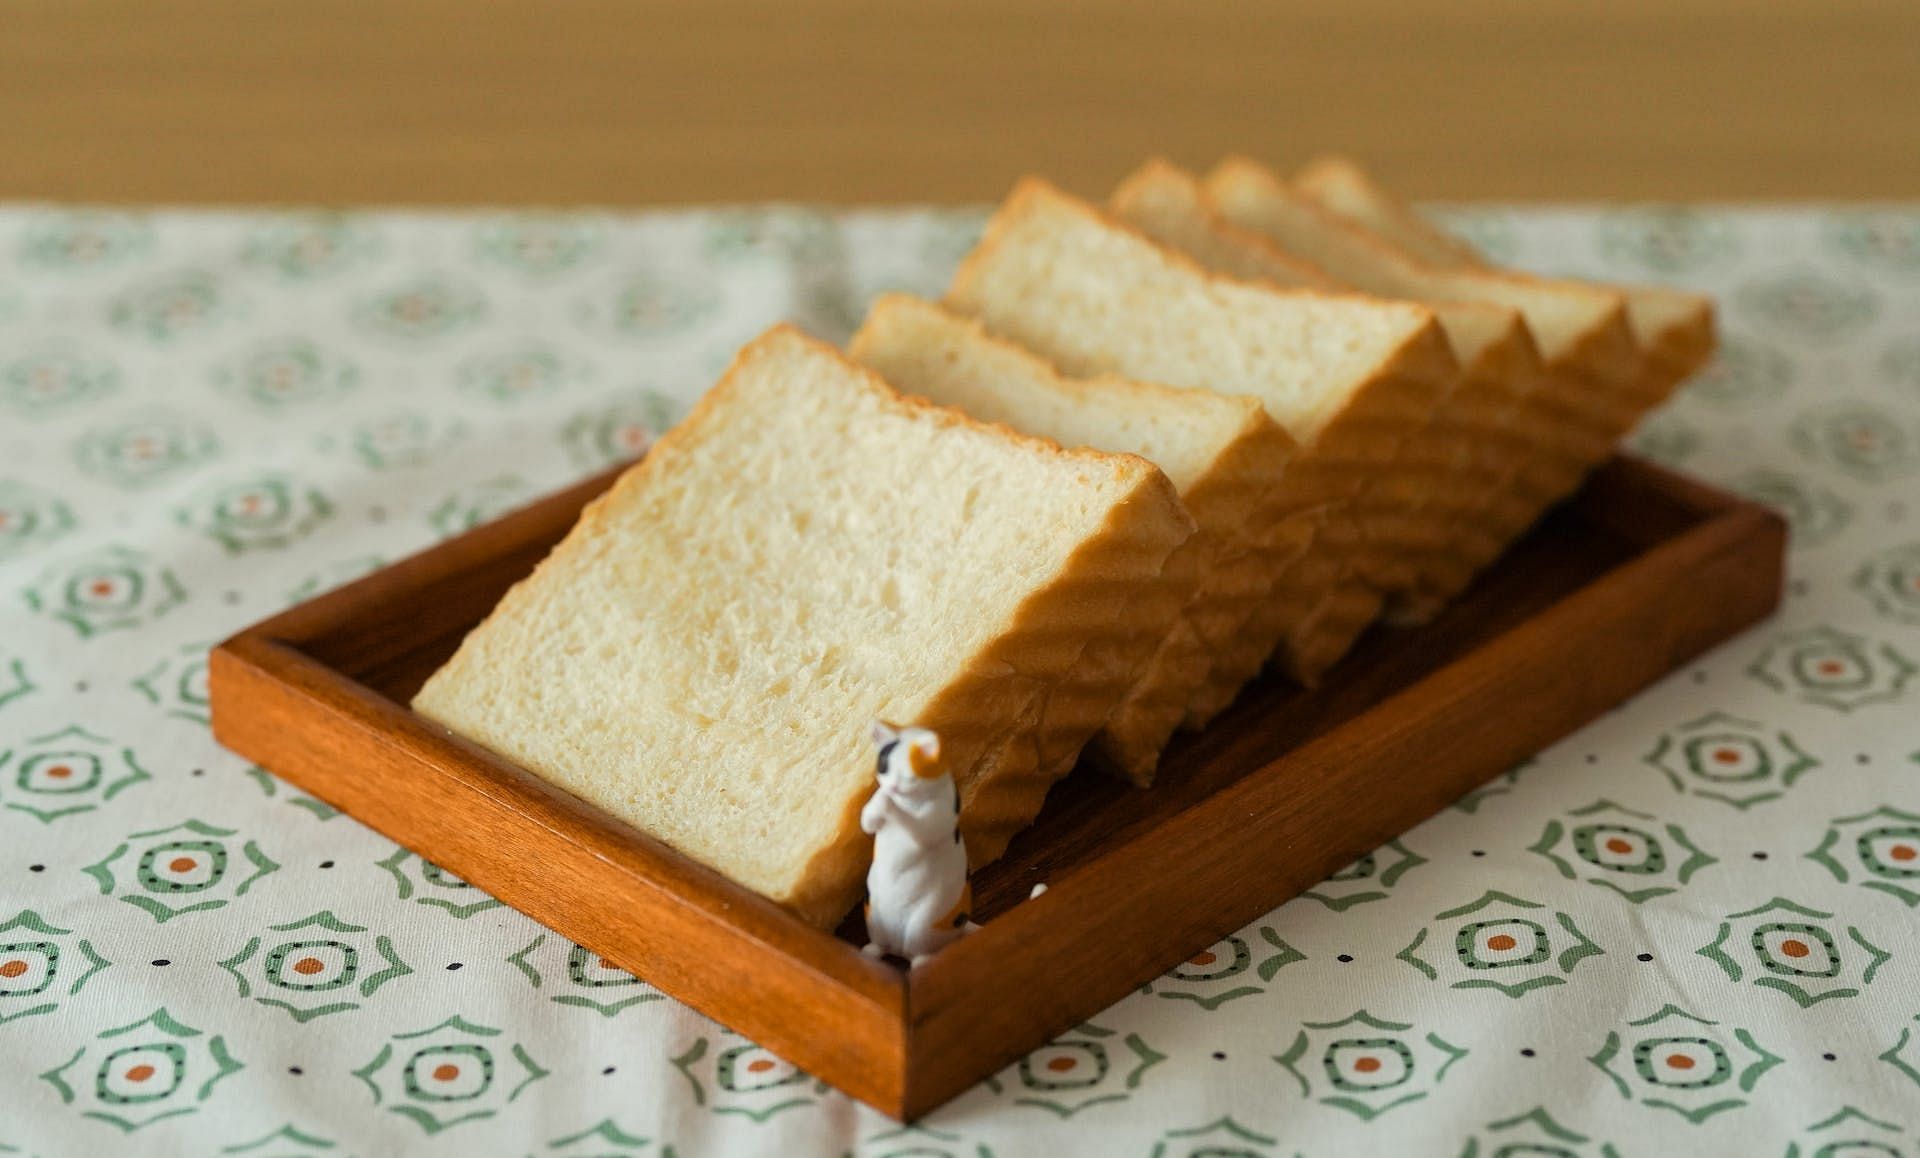 White bread has a high GI index. (Image via Pexels/Cats Coming)